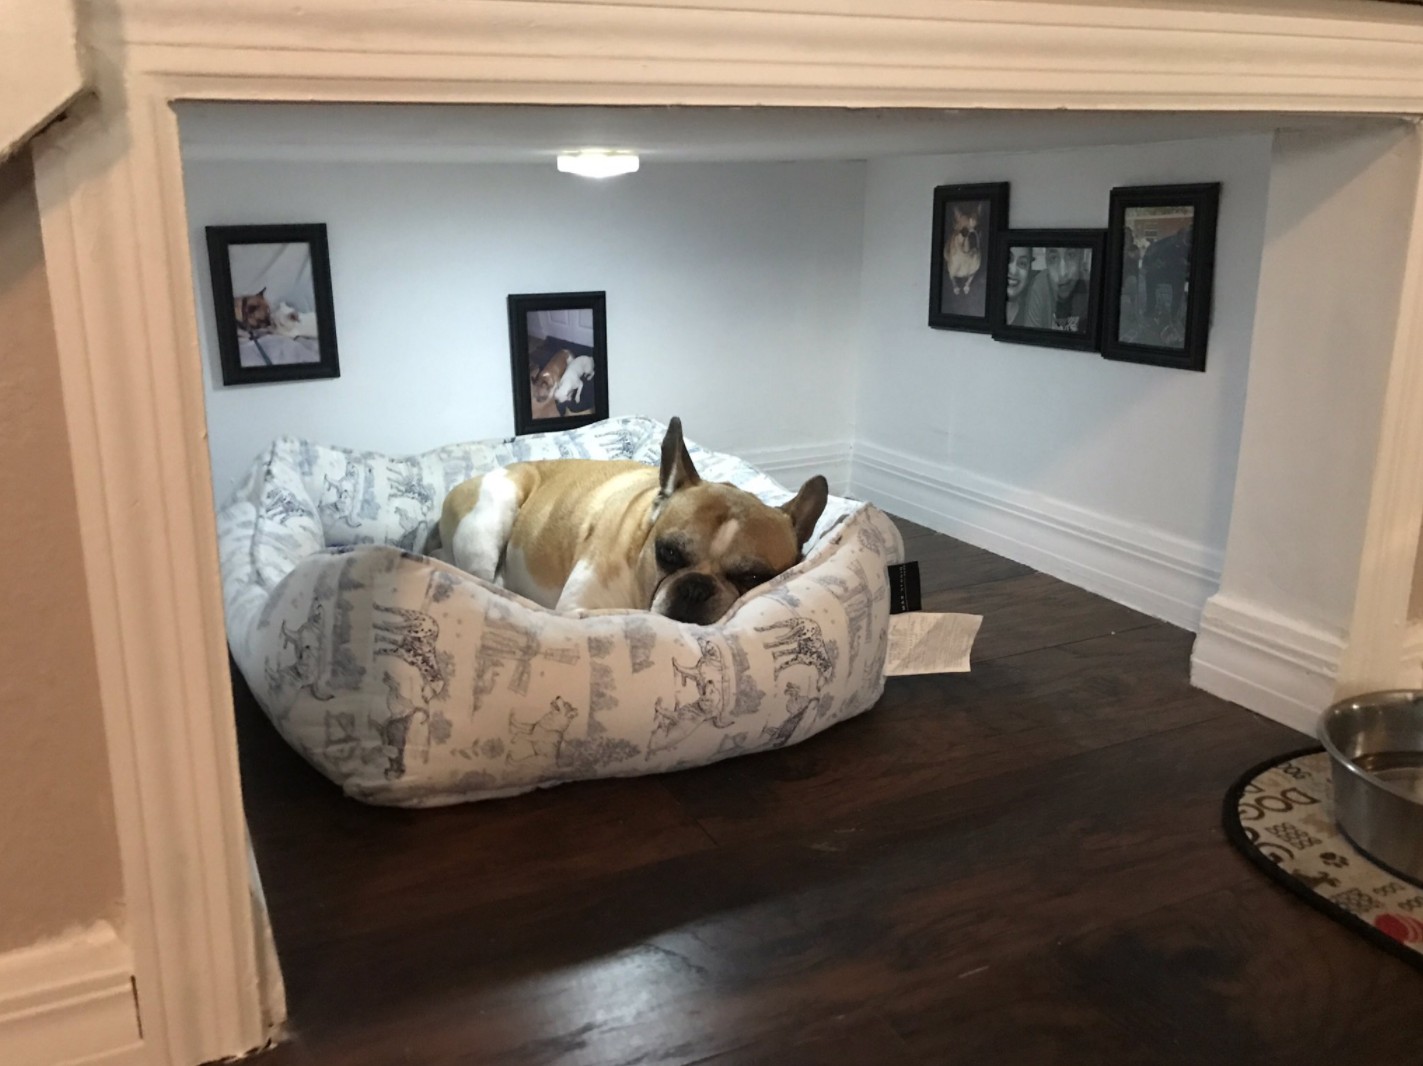 The dog in his 'room' with lights, hardwood floor and pics on the wall.